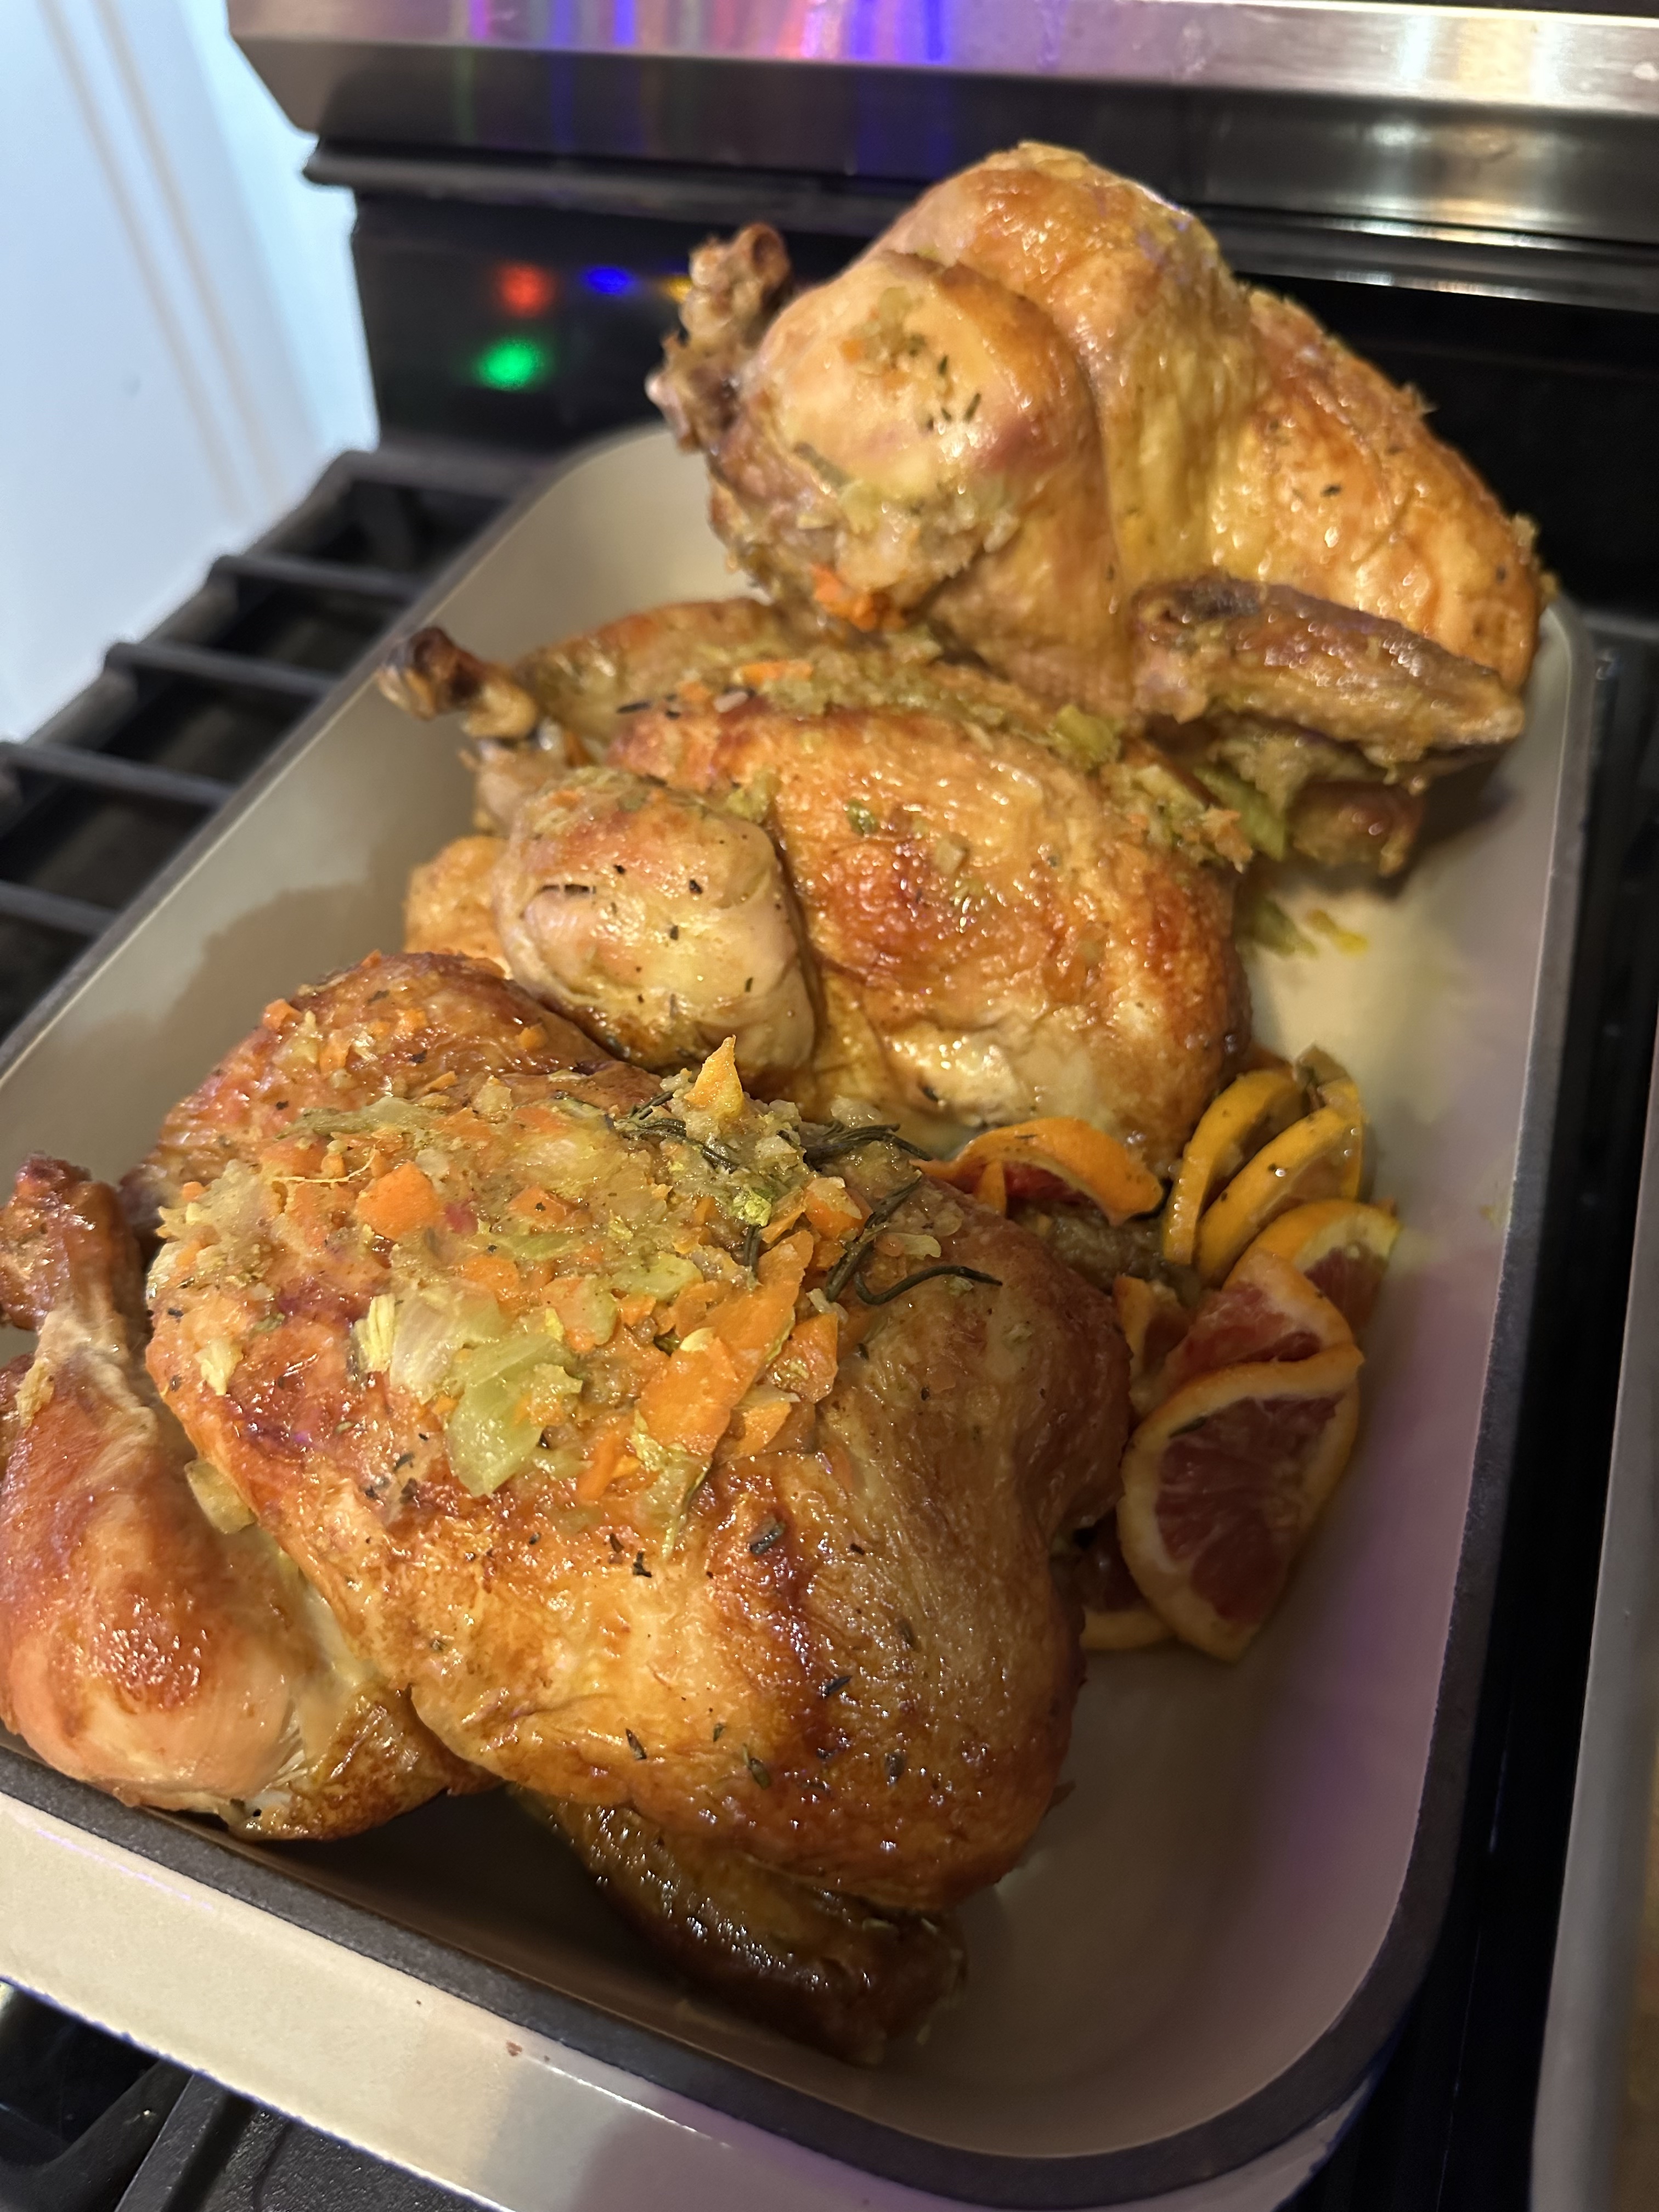 A baking dish with three roasted chickens